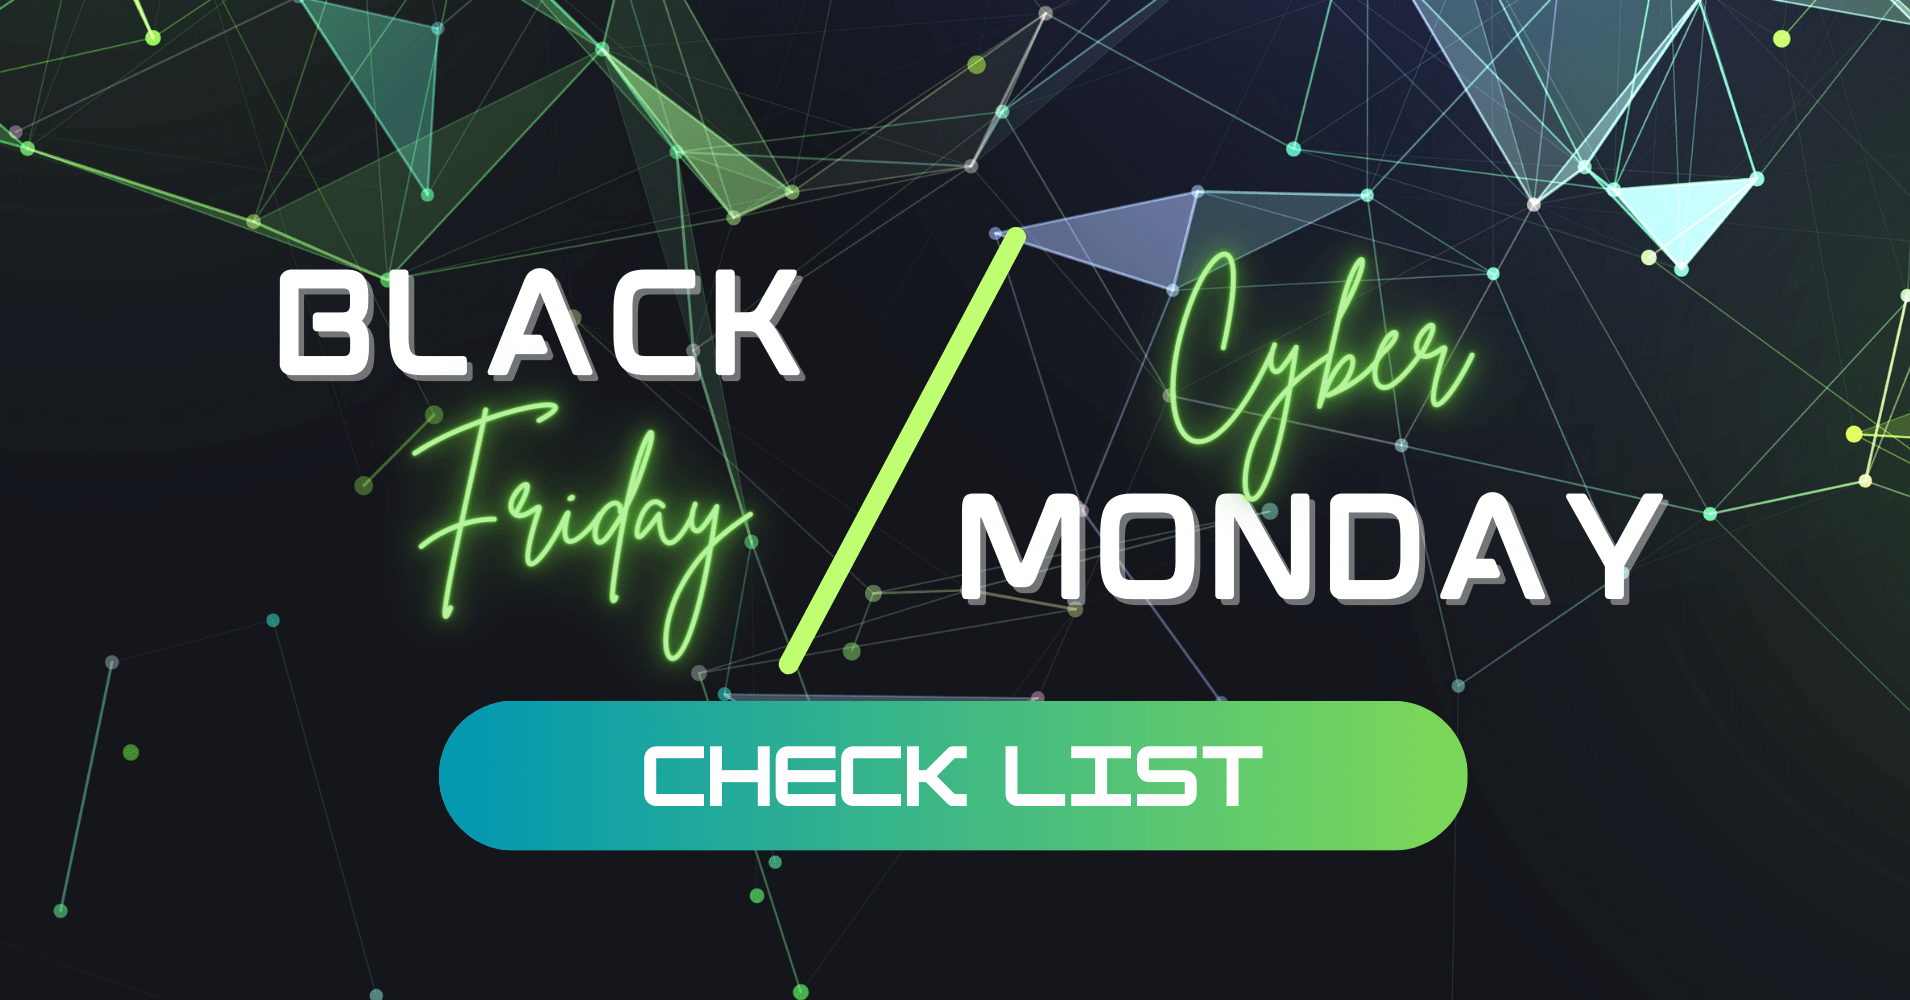 Black Friday and Cyber Monday - BFCM